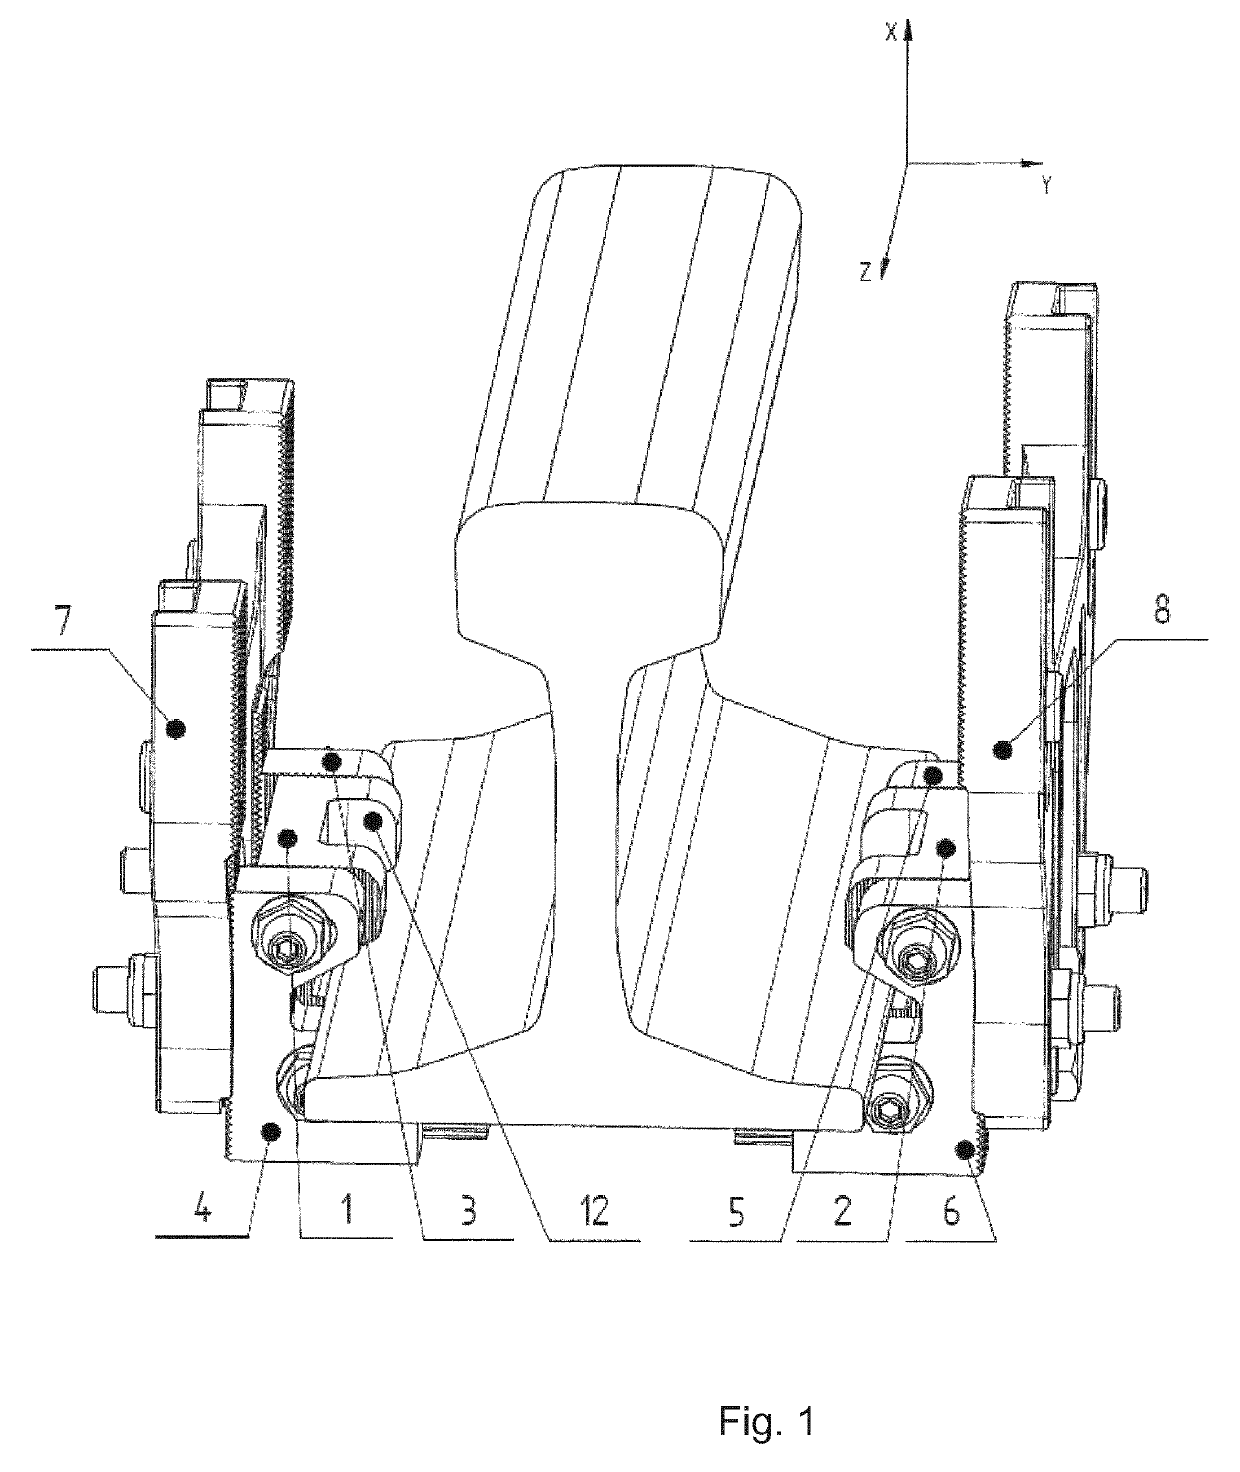 Device for fastening trackside modules to rails